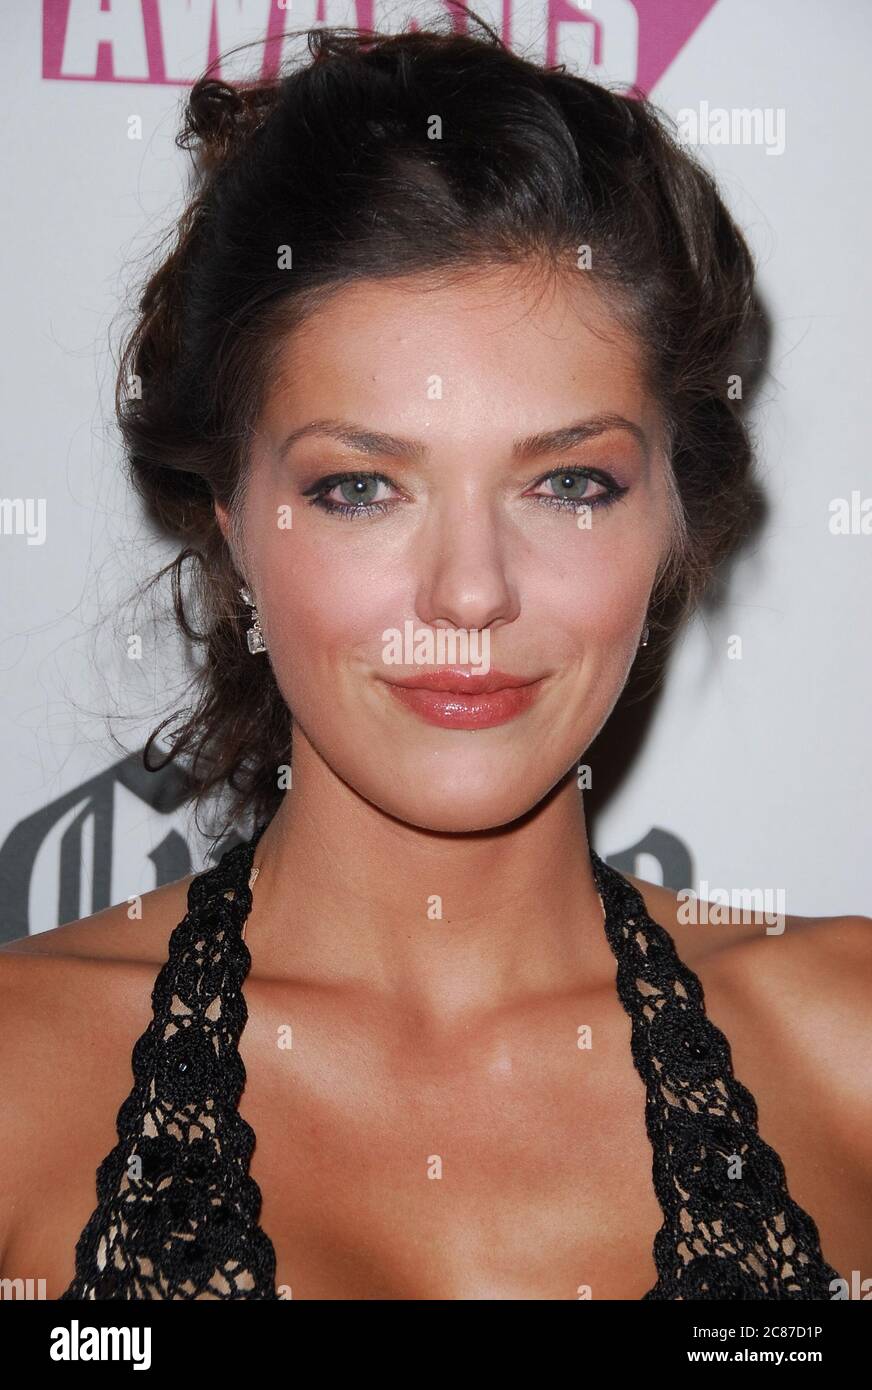 Adrianne Curry at the FOX Reality Channell Really Awards 2007 held at Boulevard3 in Hollywood, CA. The event took place on Tuesday, October 2, 2007. Photo by: SBM / PictureLux- File Reference # 34006-9022SBMPLX Stock Photo